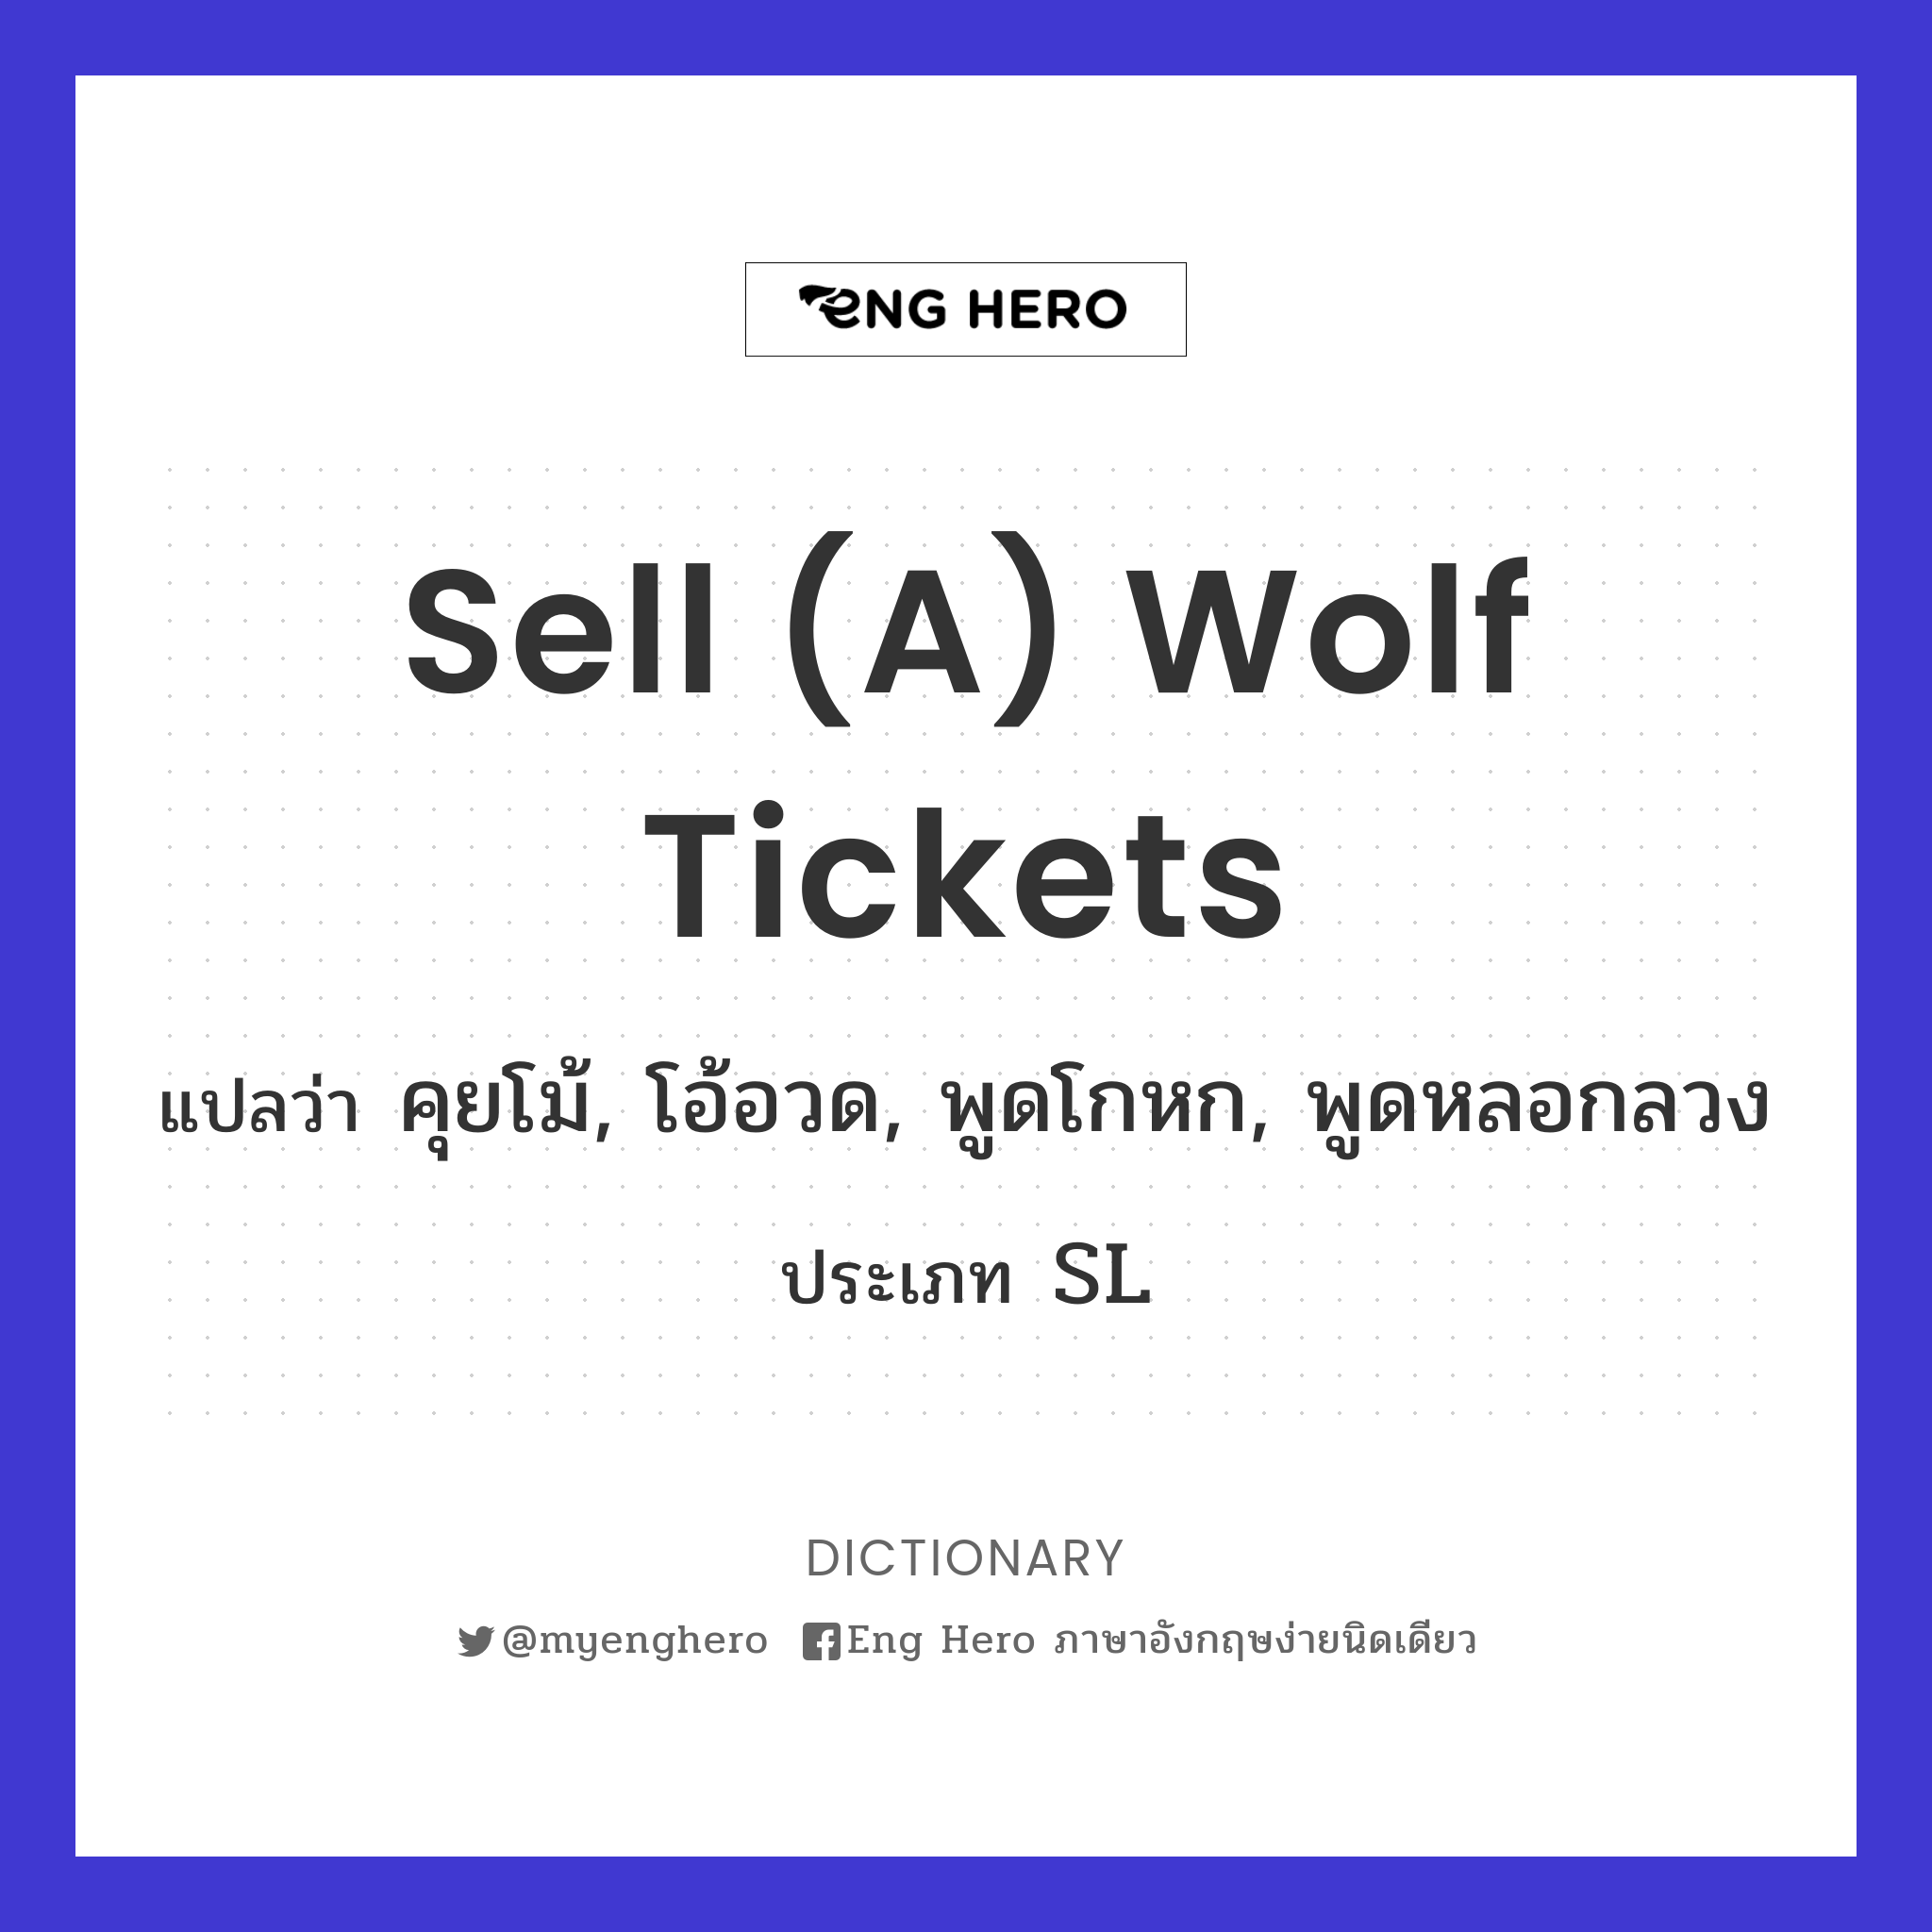 sell (a) wolf tickets